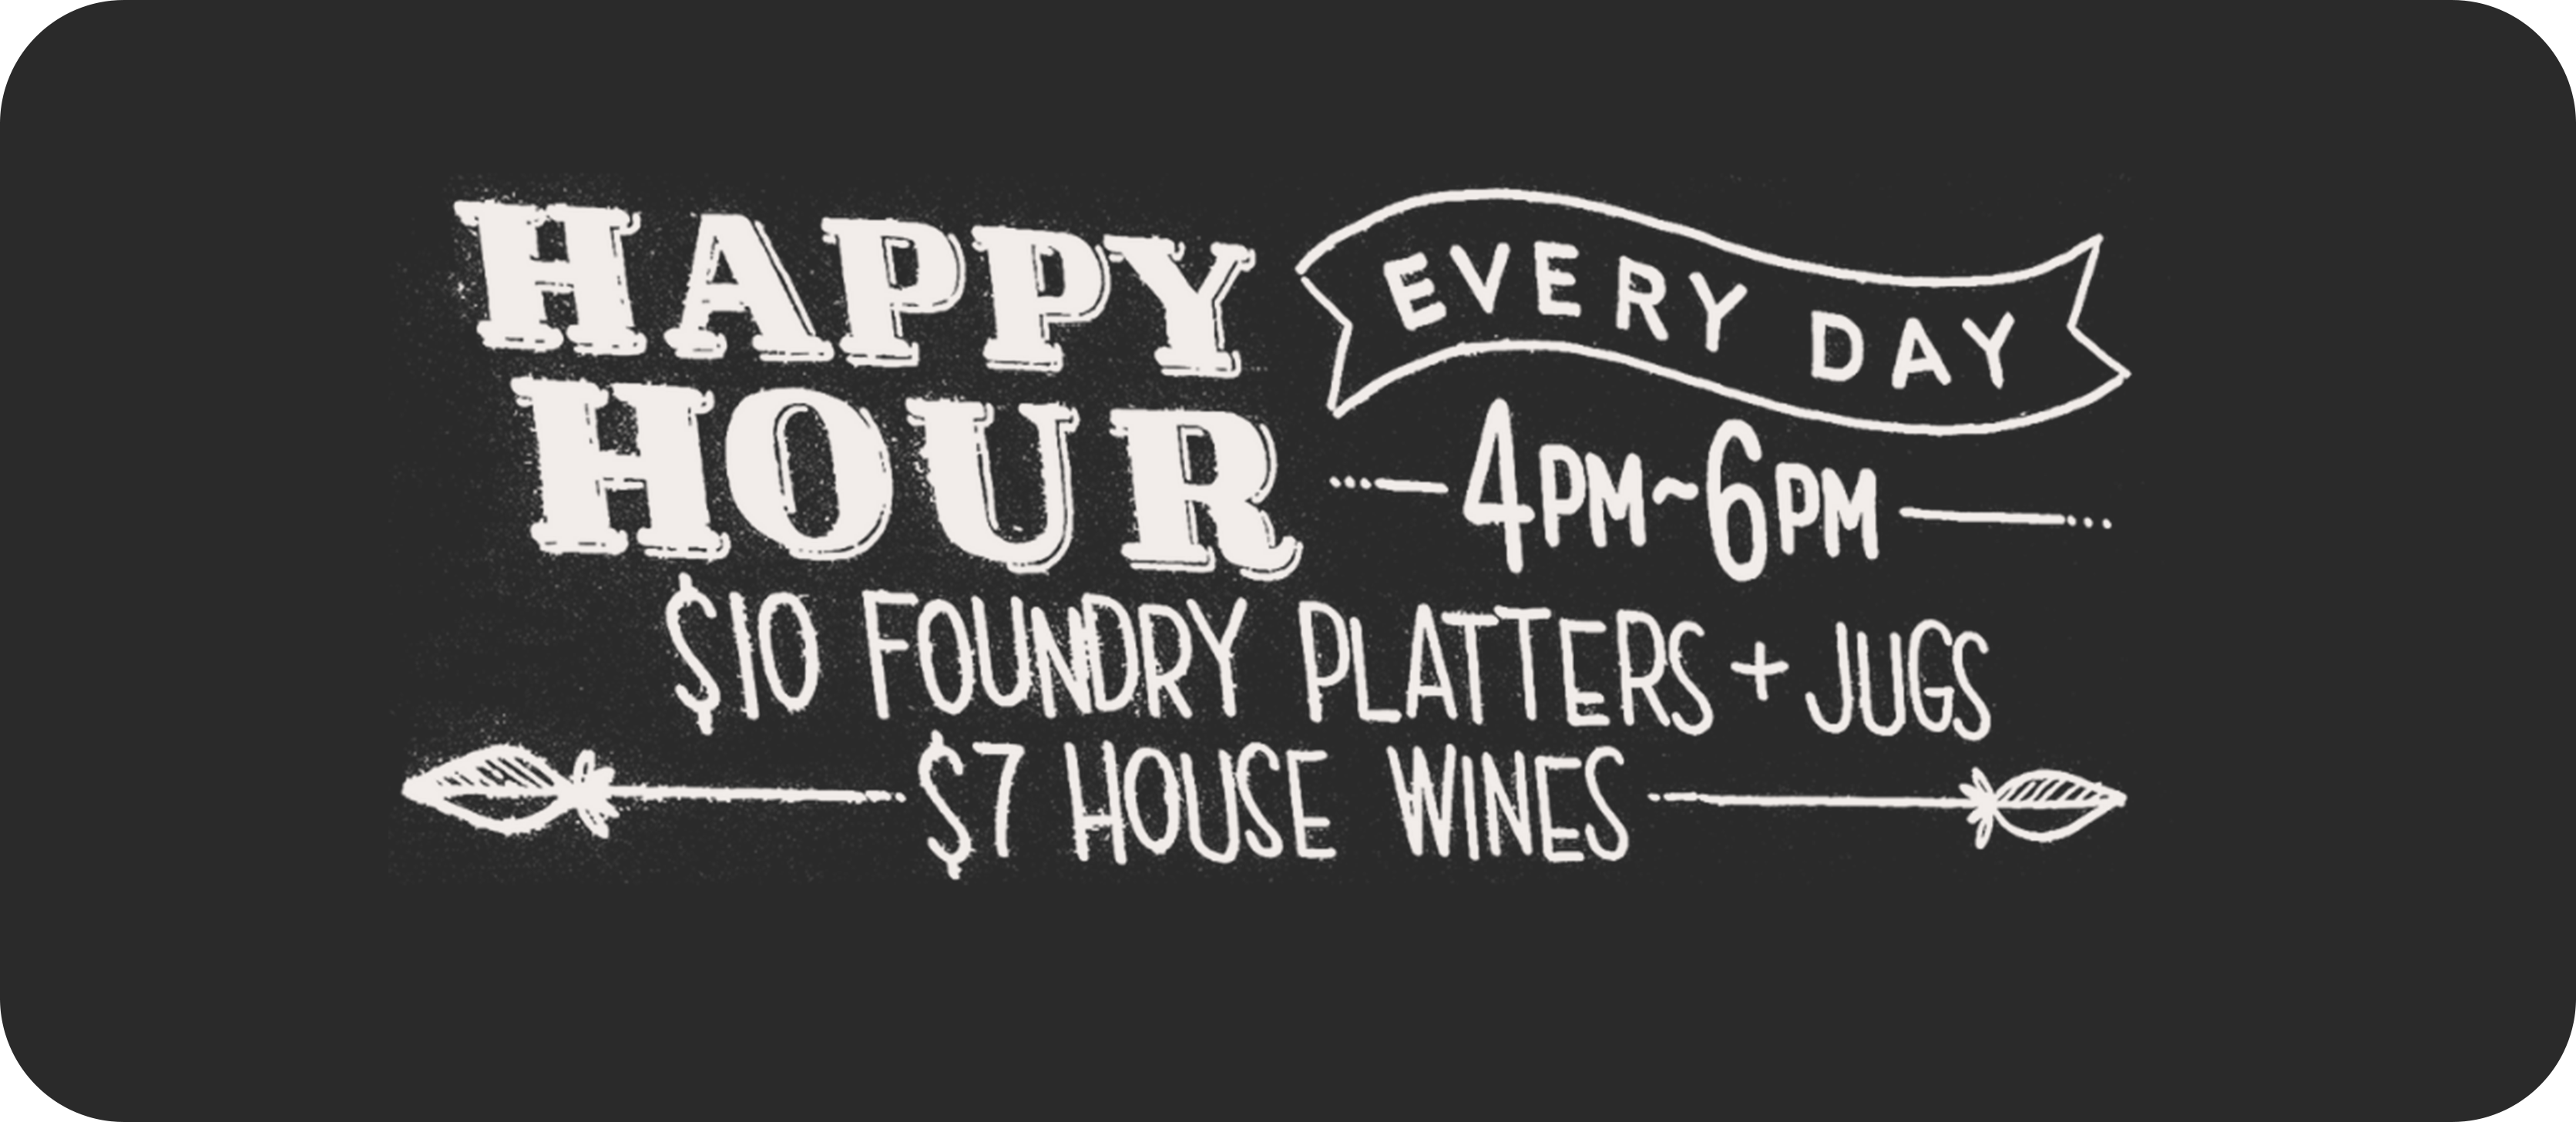 Advertisement for happy hour every day 4pm-6pm